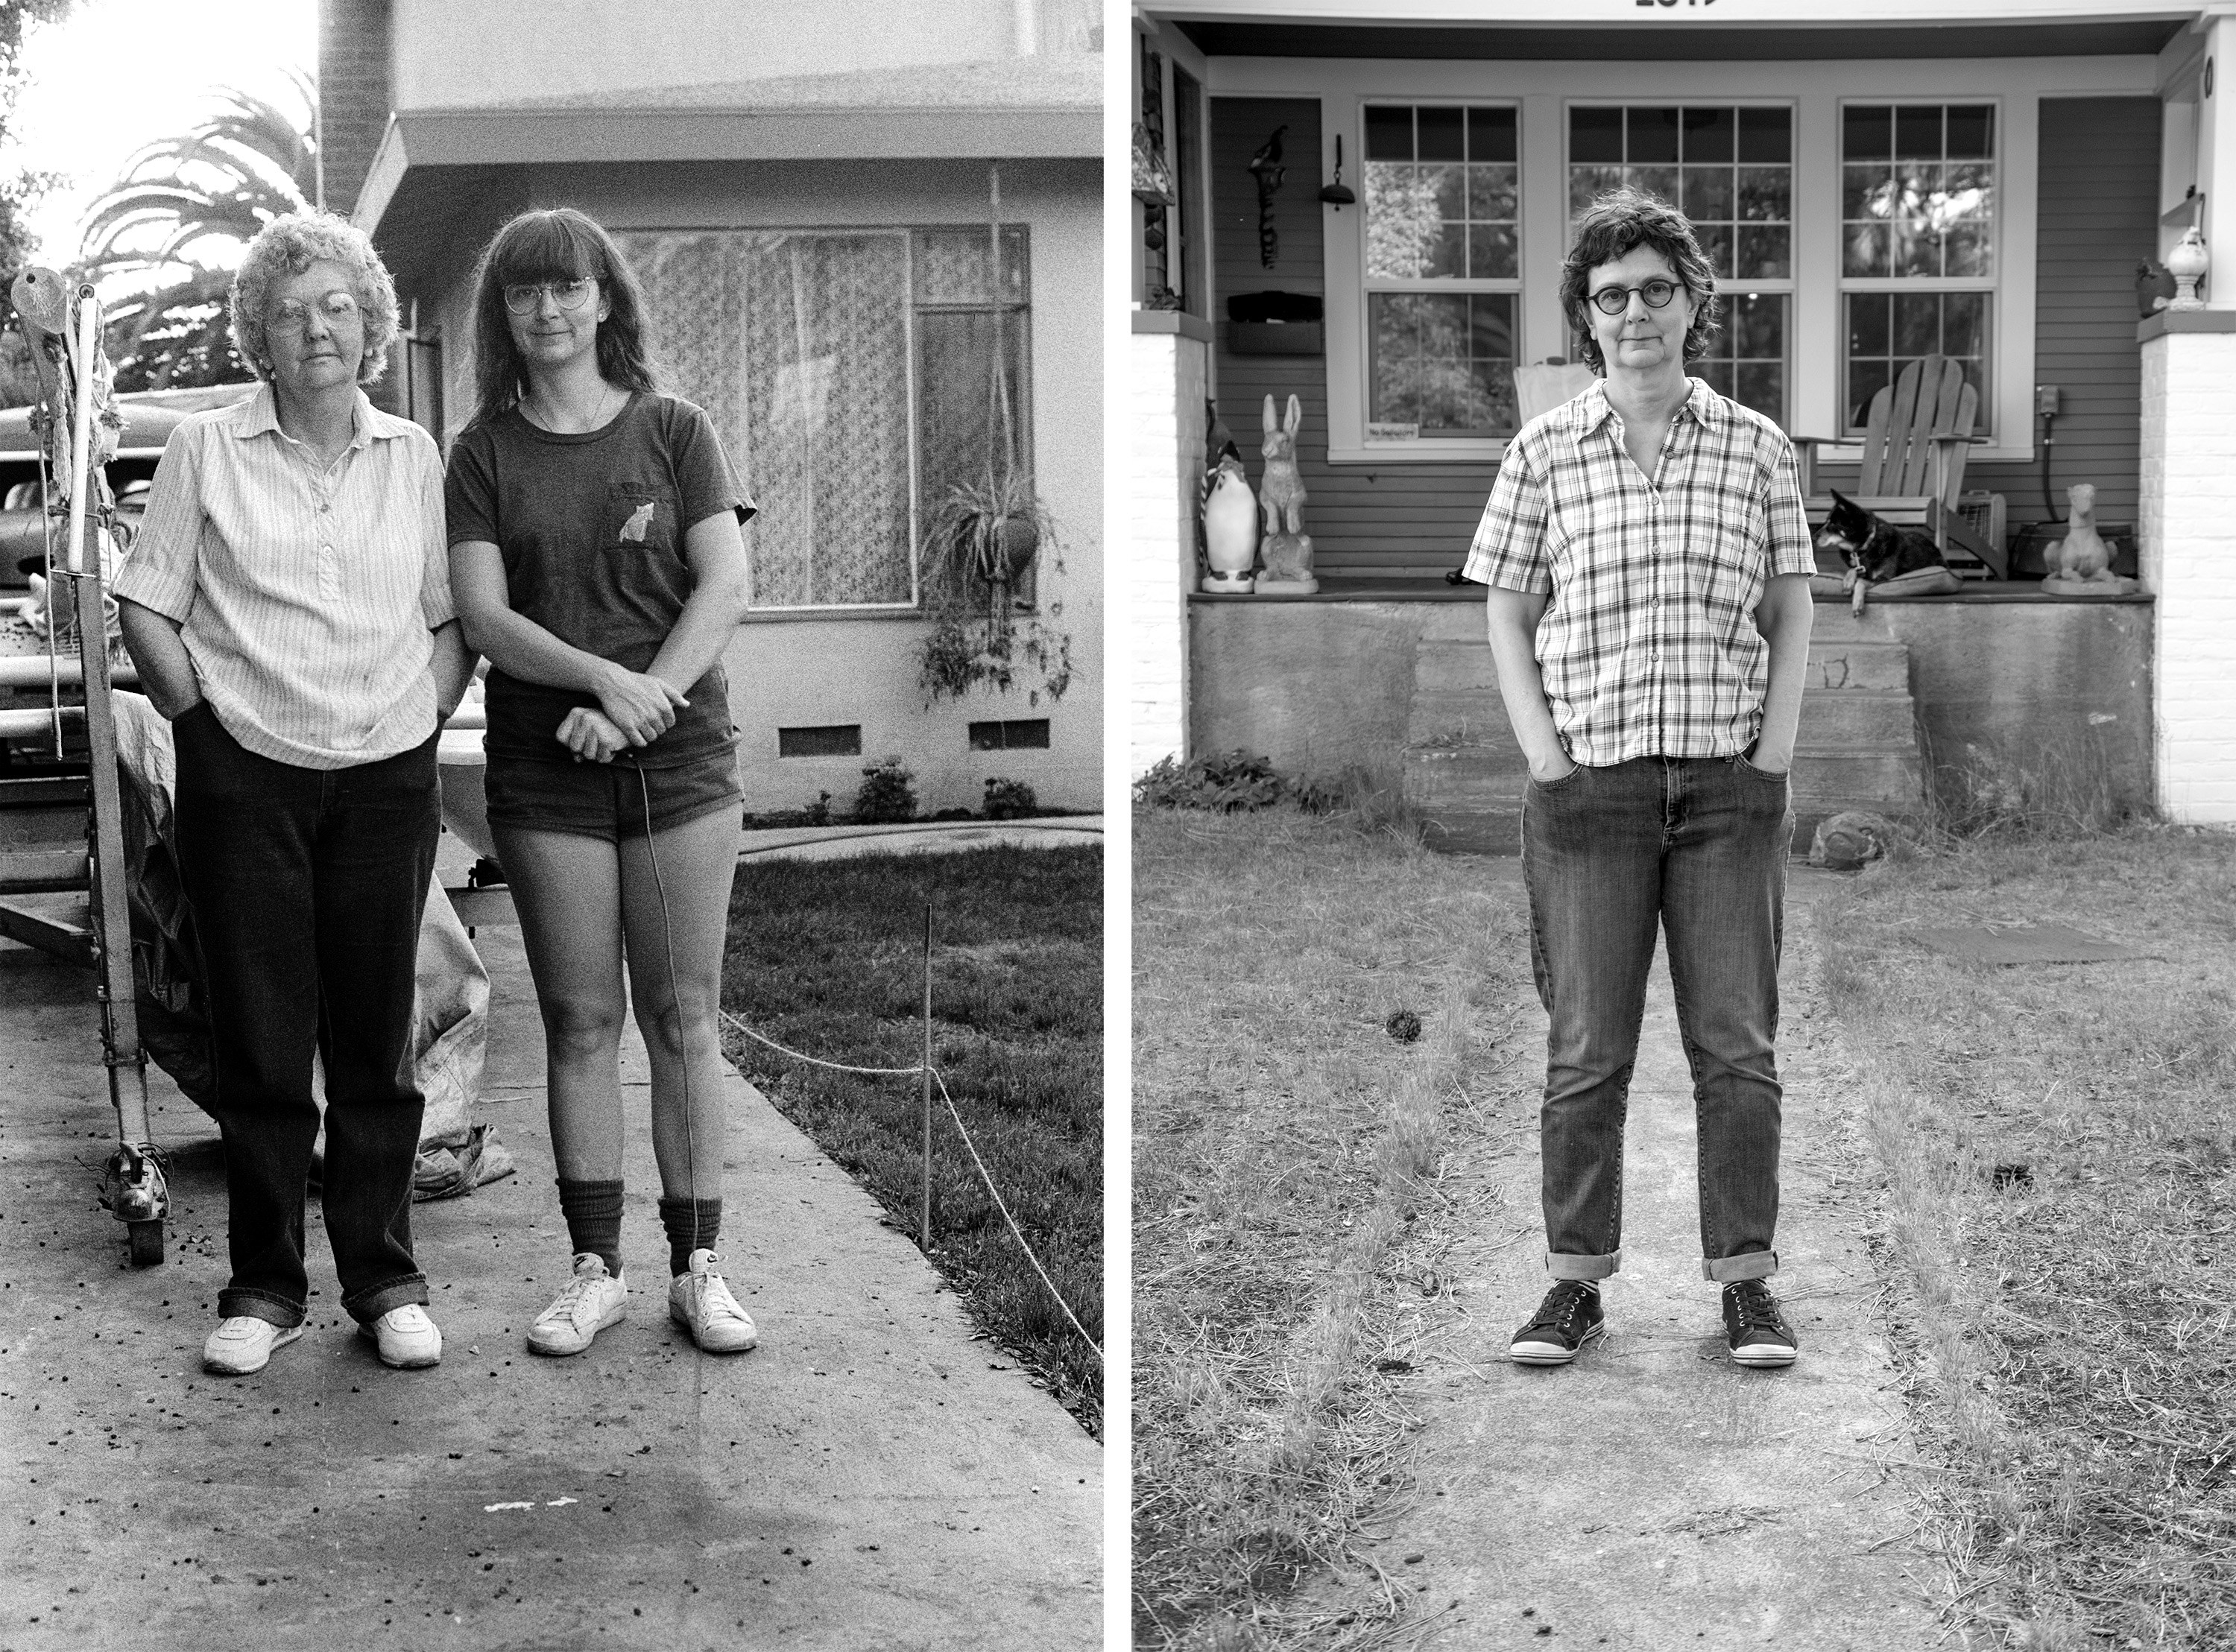 Two images side by side of a woman taken thirty years apart; on the left she is with her mother and on the right she is alone